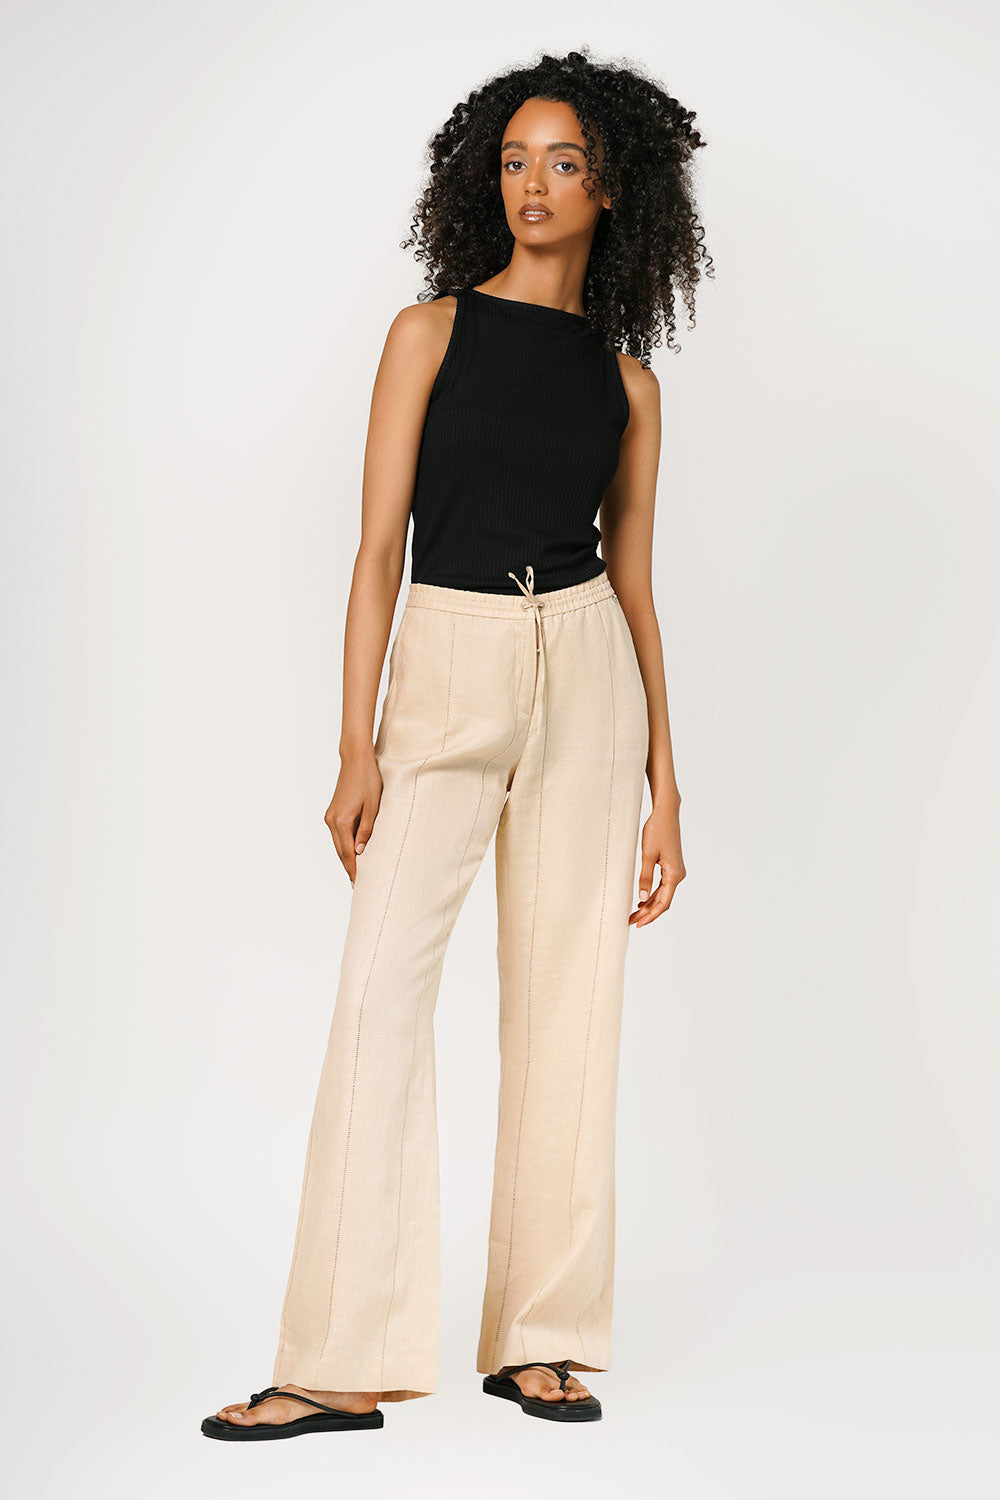 Escada Sport Relaxed Cotton Trousers With Cut Out Detail Size S